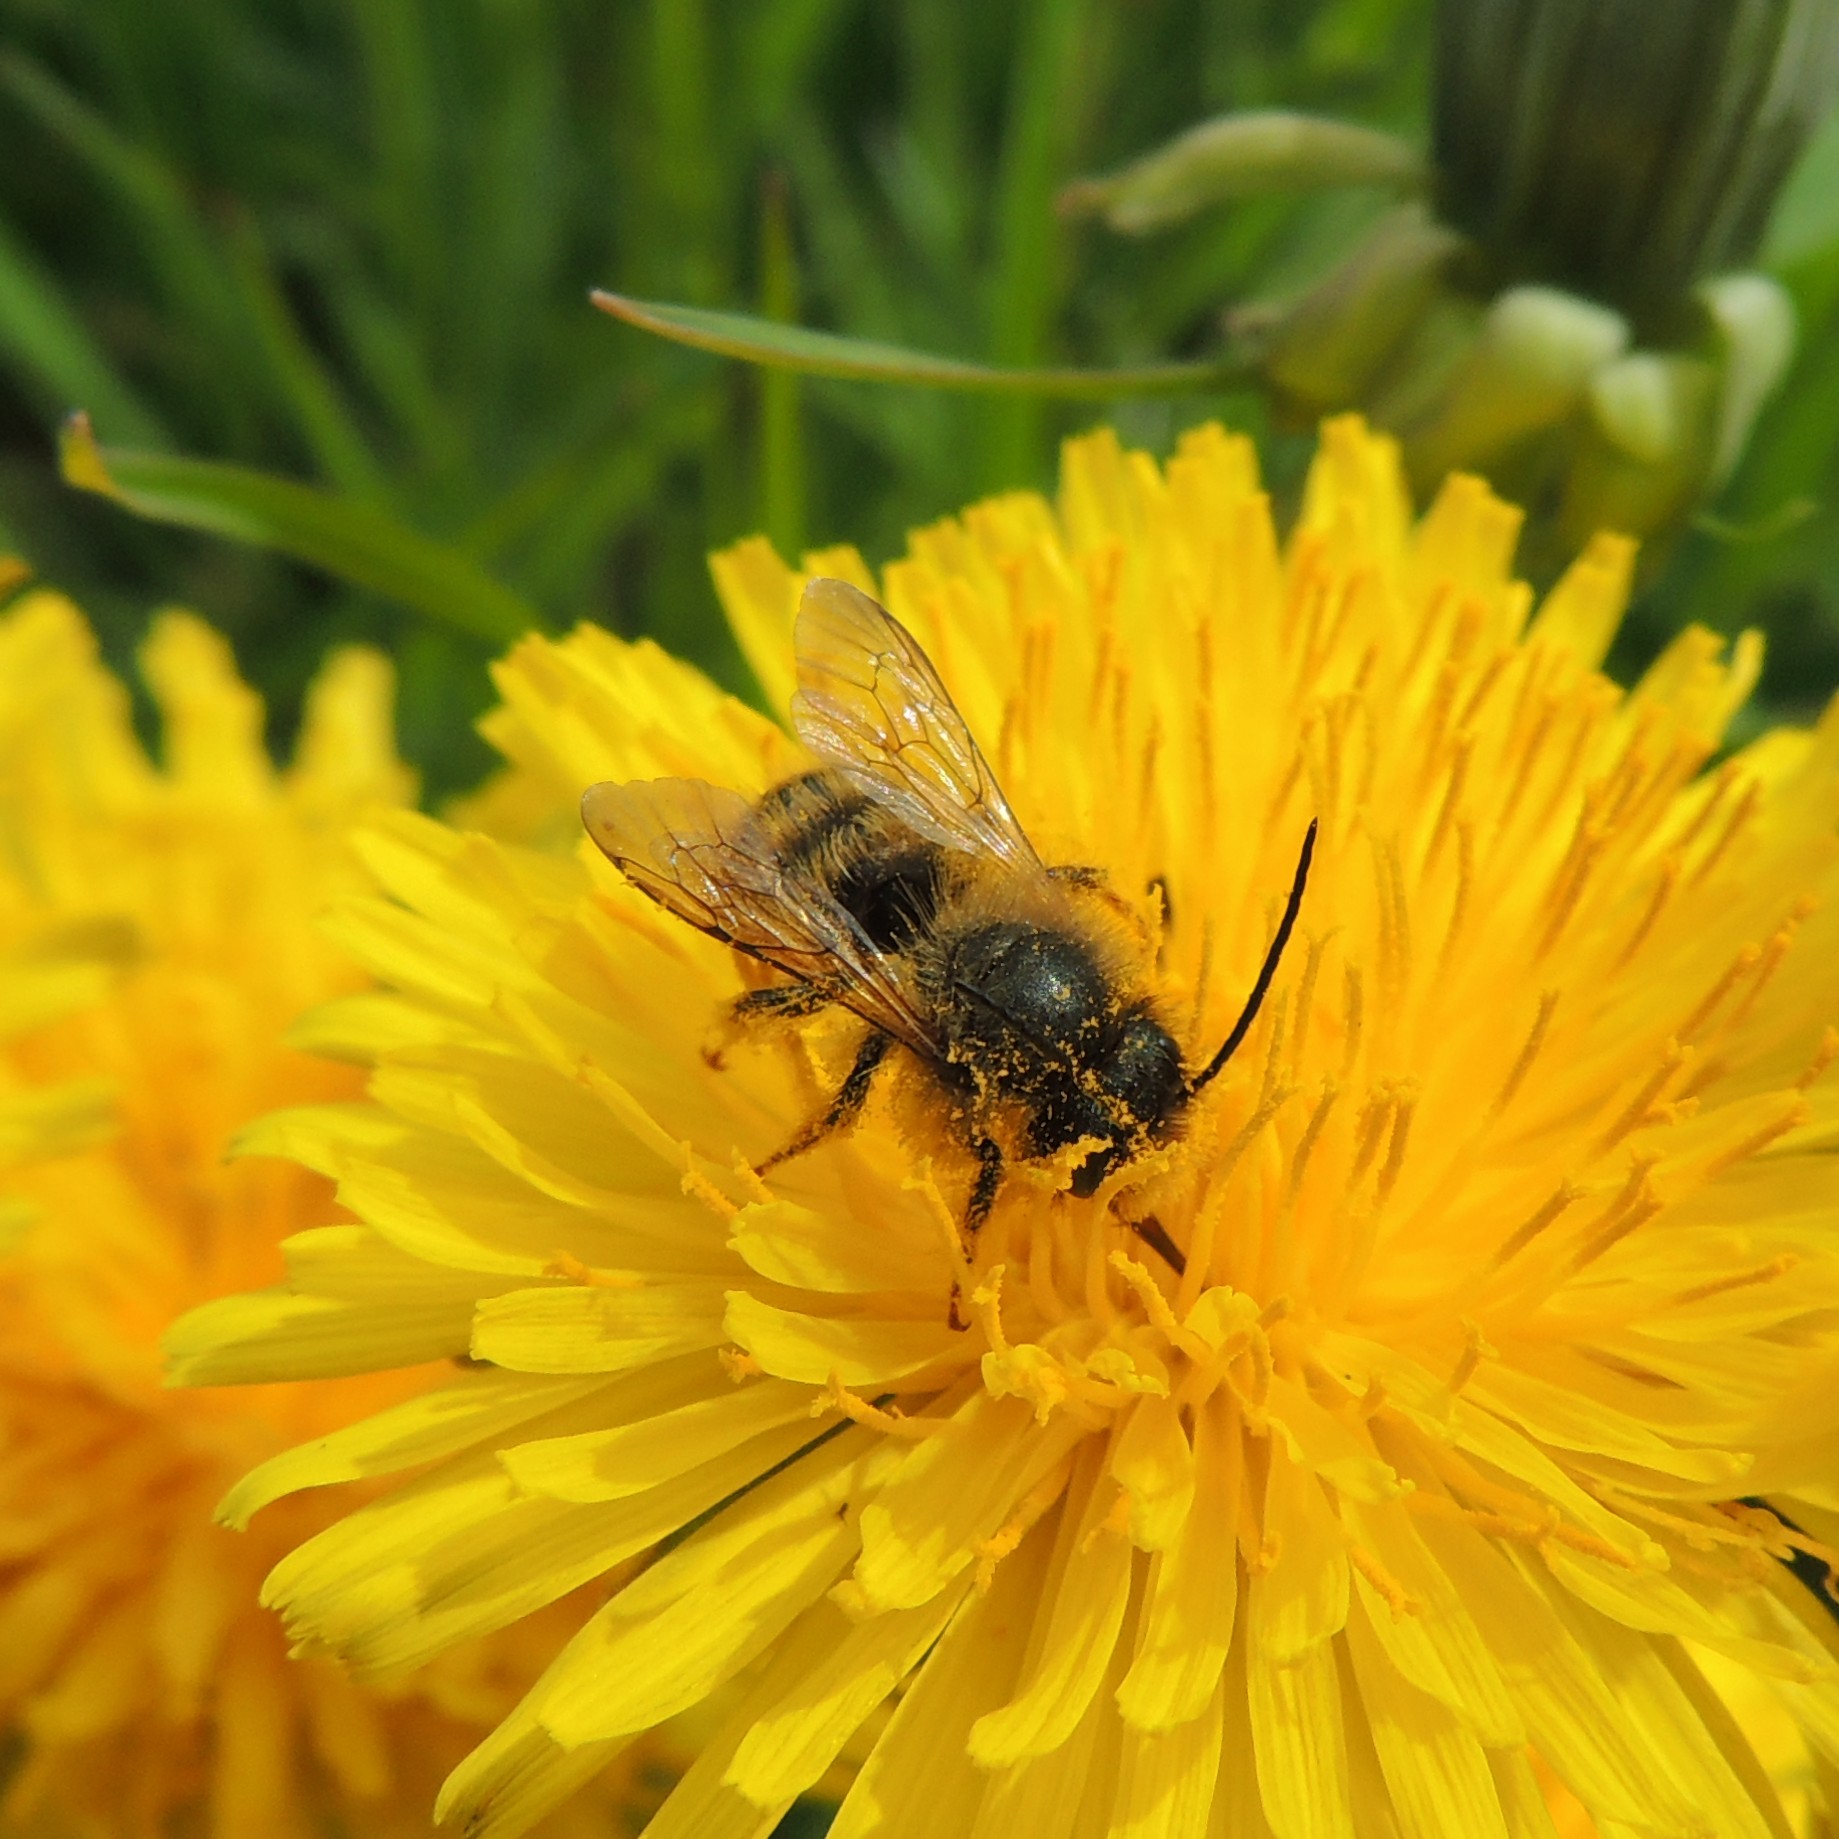 File:Solitary bee on a dandelion, Sandy Bedfordshire (17195807940 ...